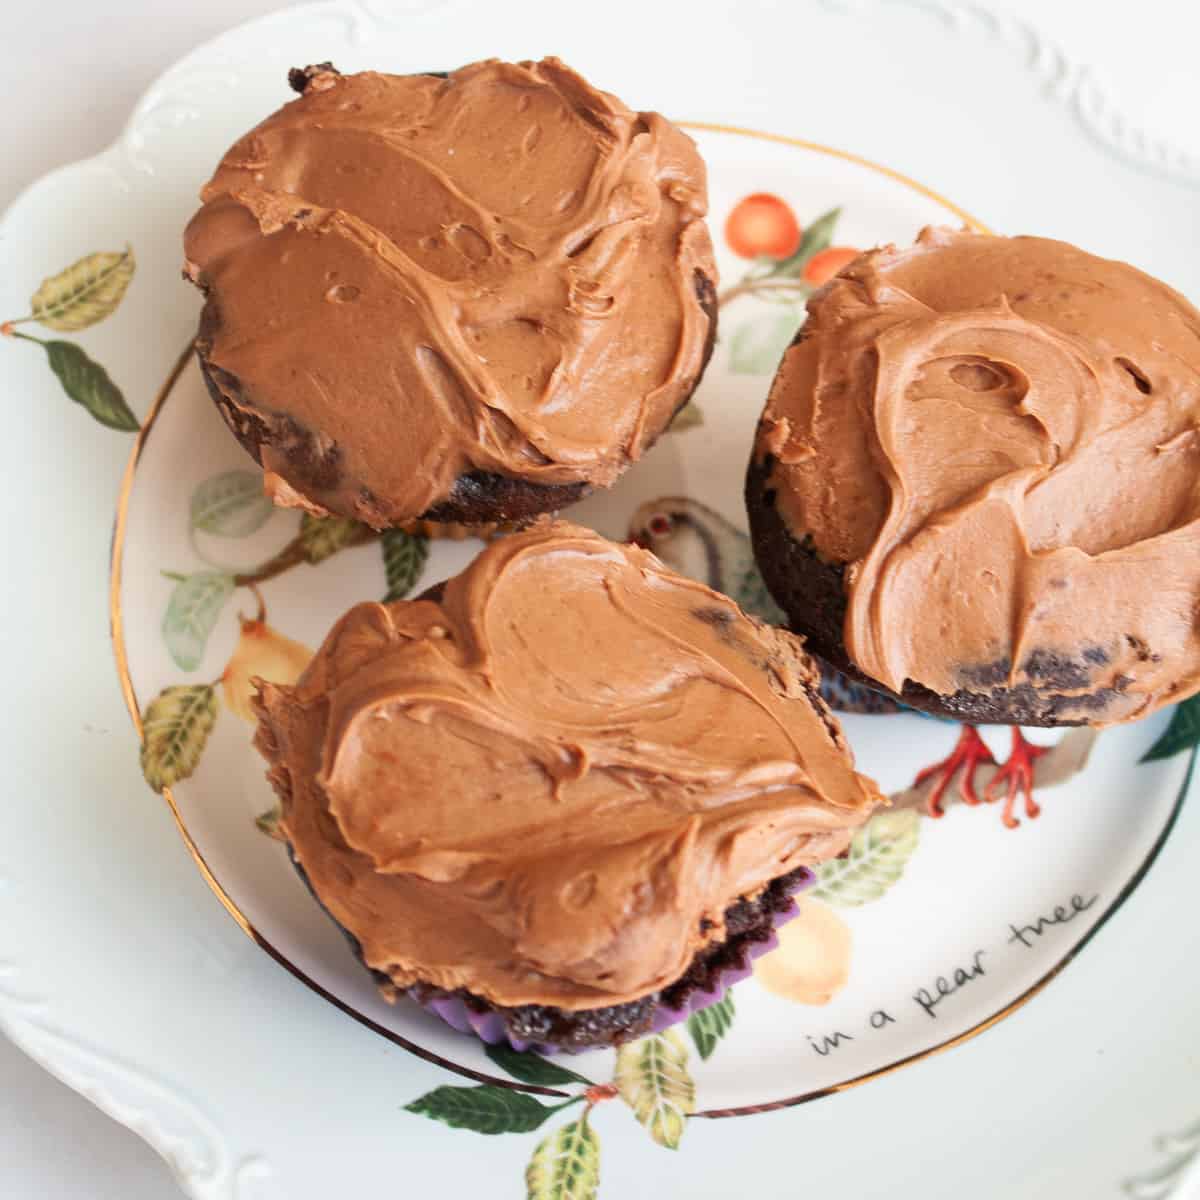 Three oat flour chocolate cupcakes on a plate.